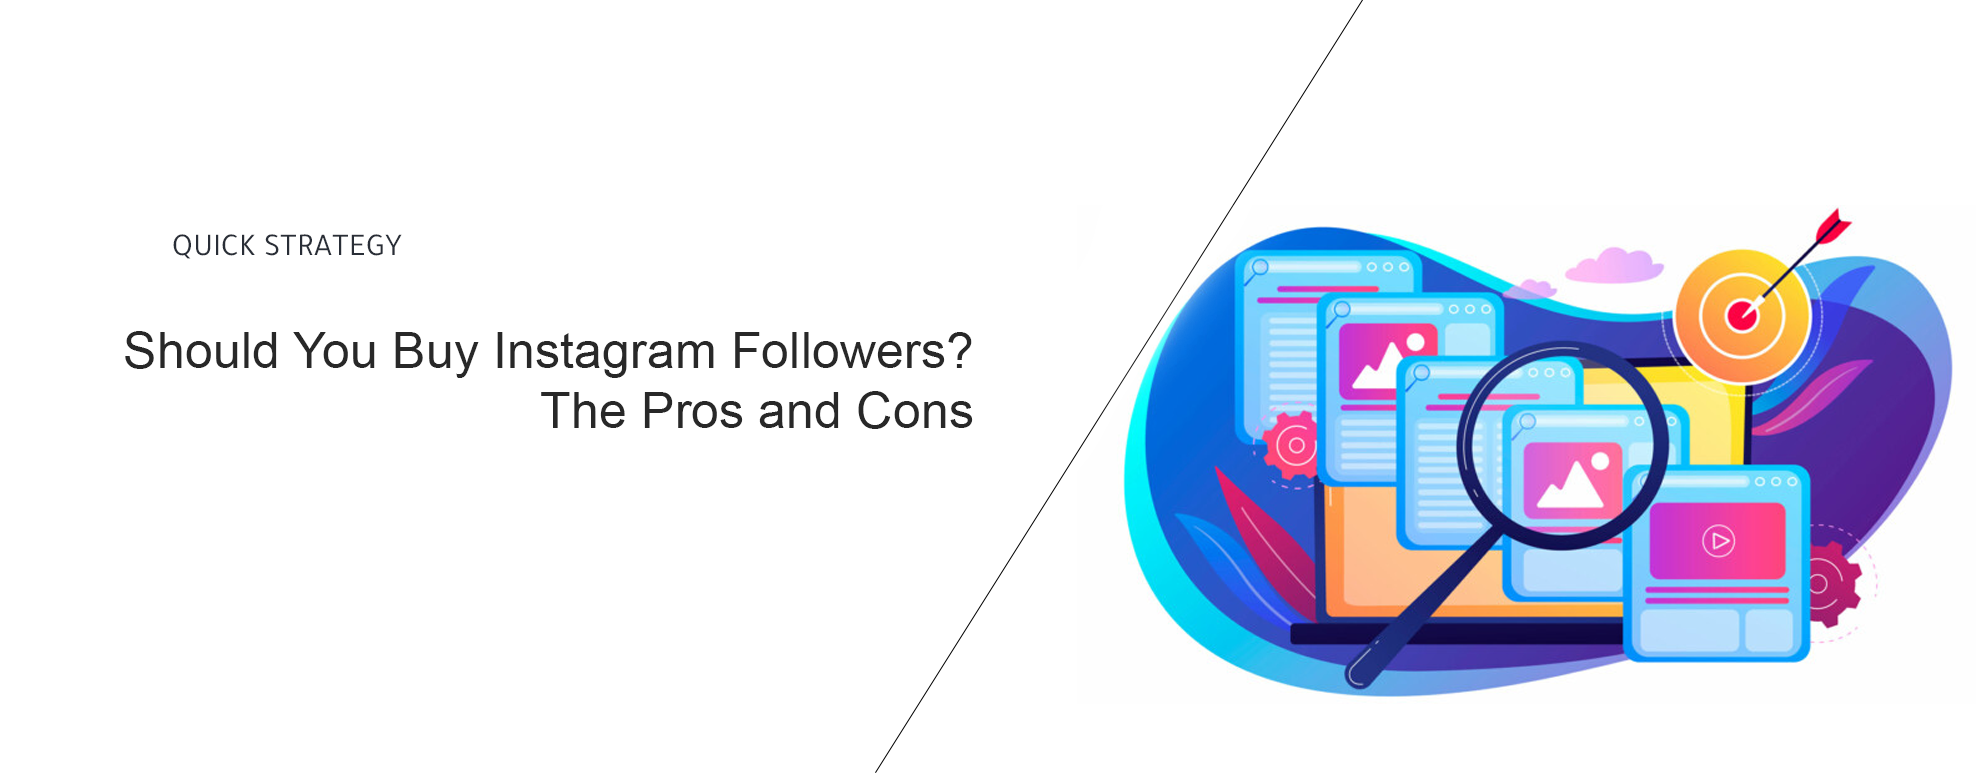 Should You Buy Instagram Followers? The Pros and Cons